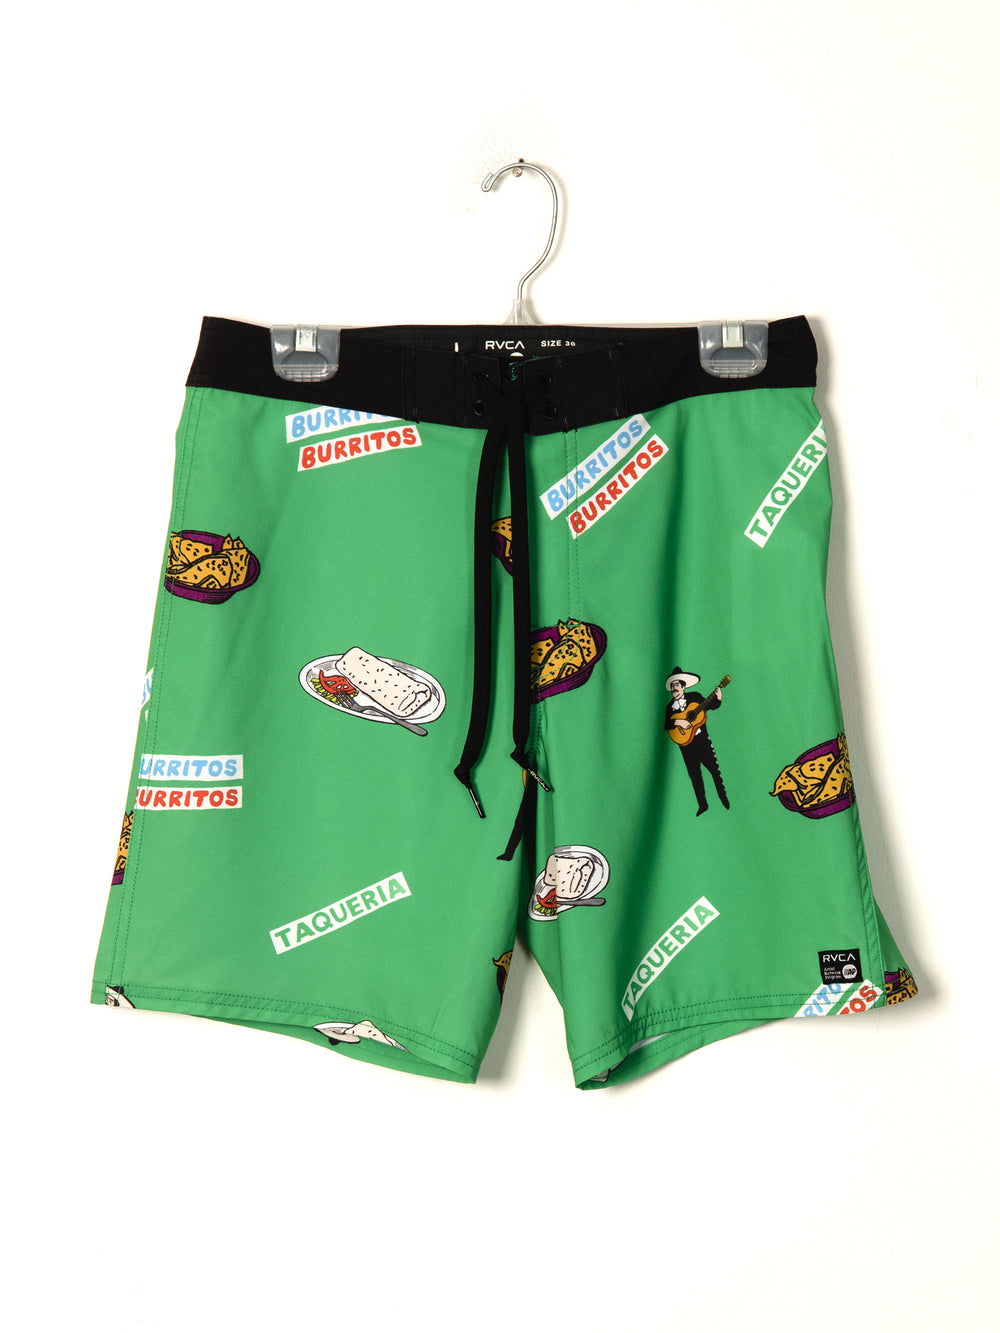 MALLE 18' MENS HOT FUDGE - GREEN - CLEARANCE